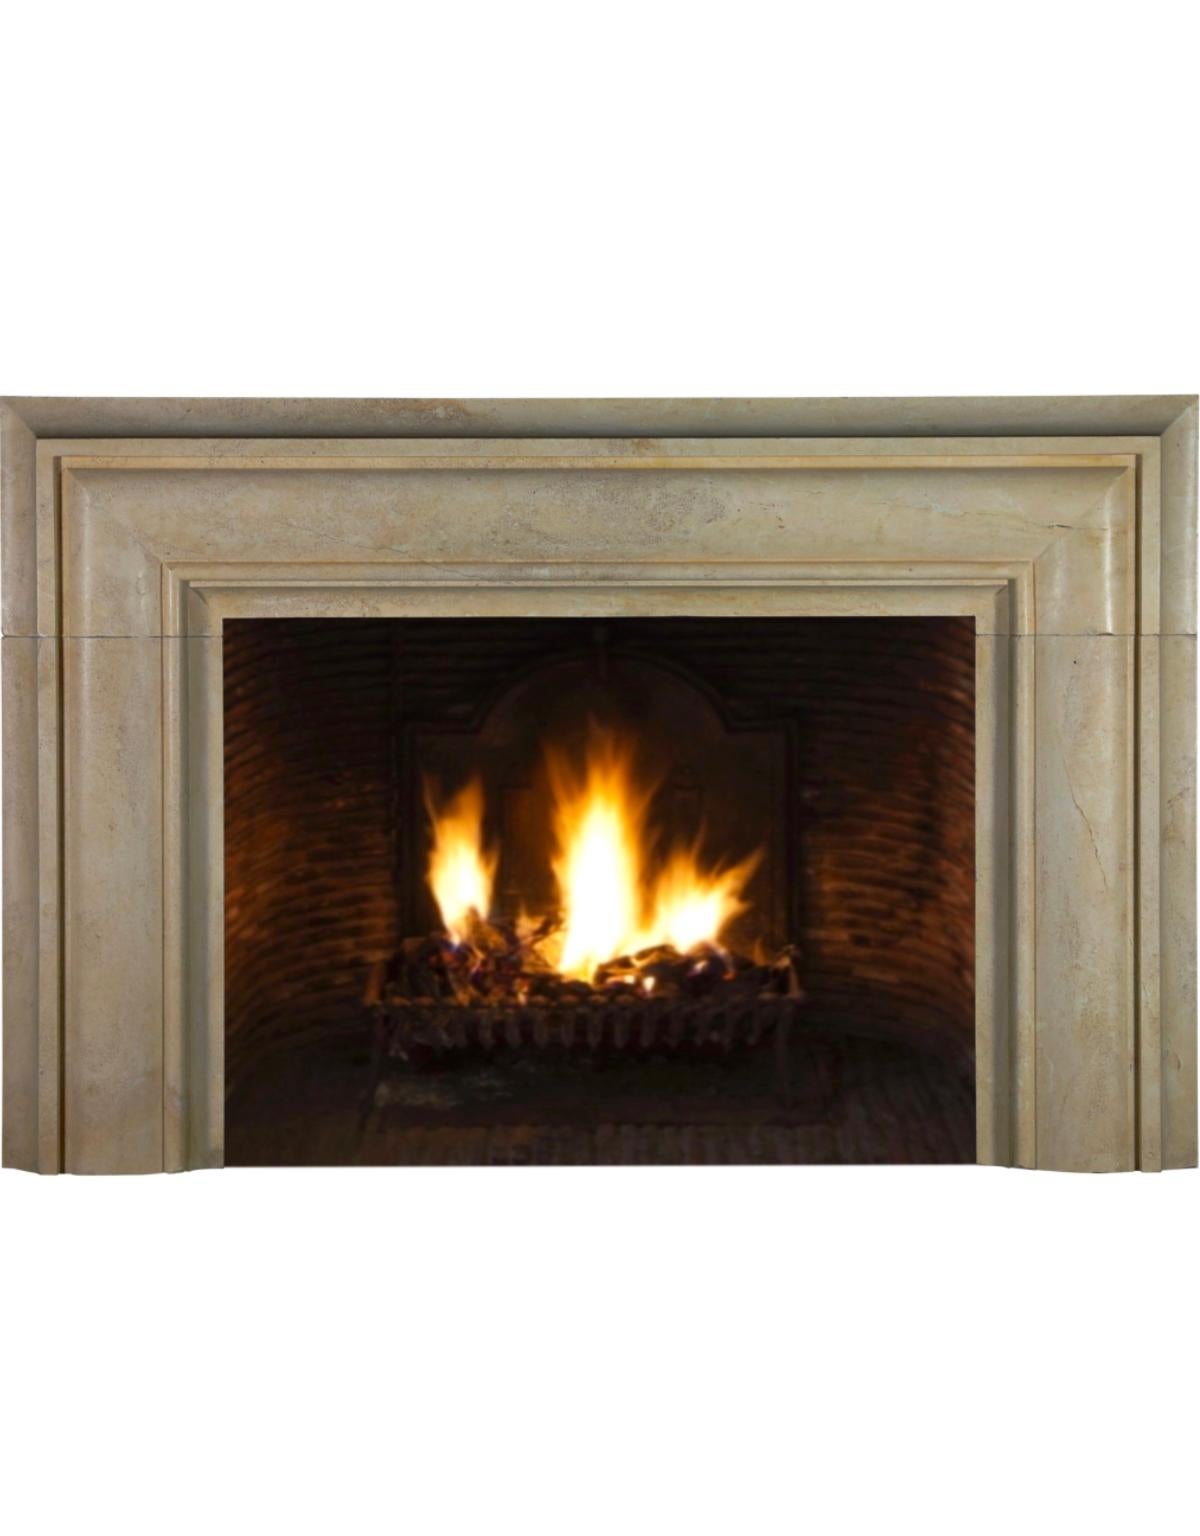 Timeless Bolection Stone Fireplace Surround For Sale 6